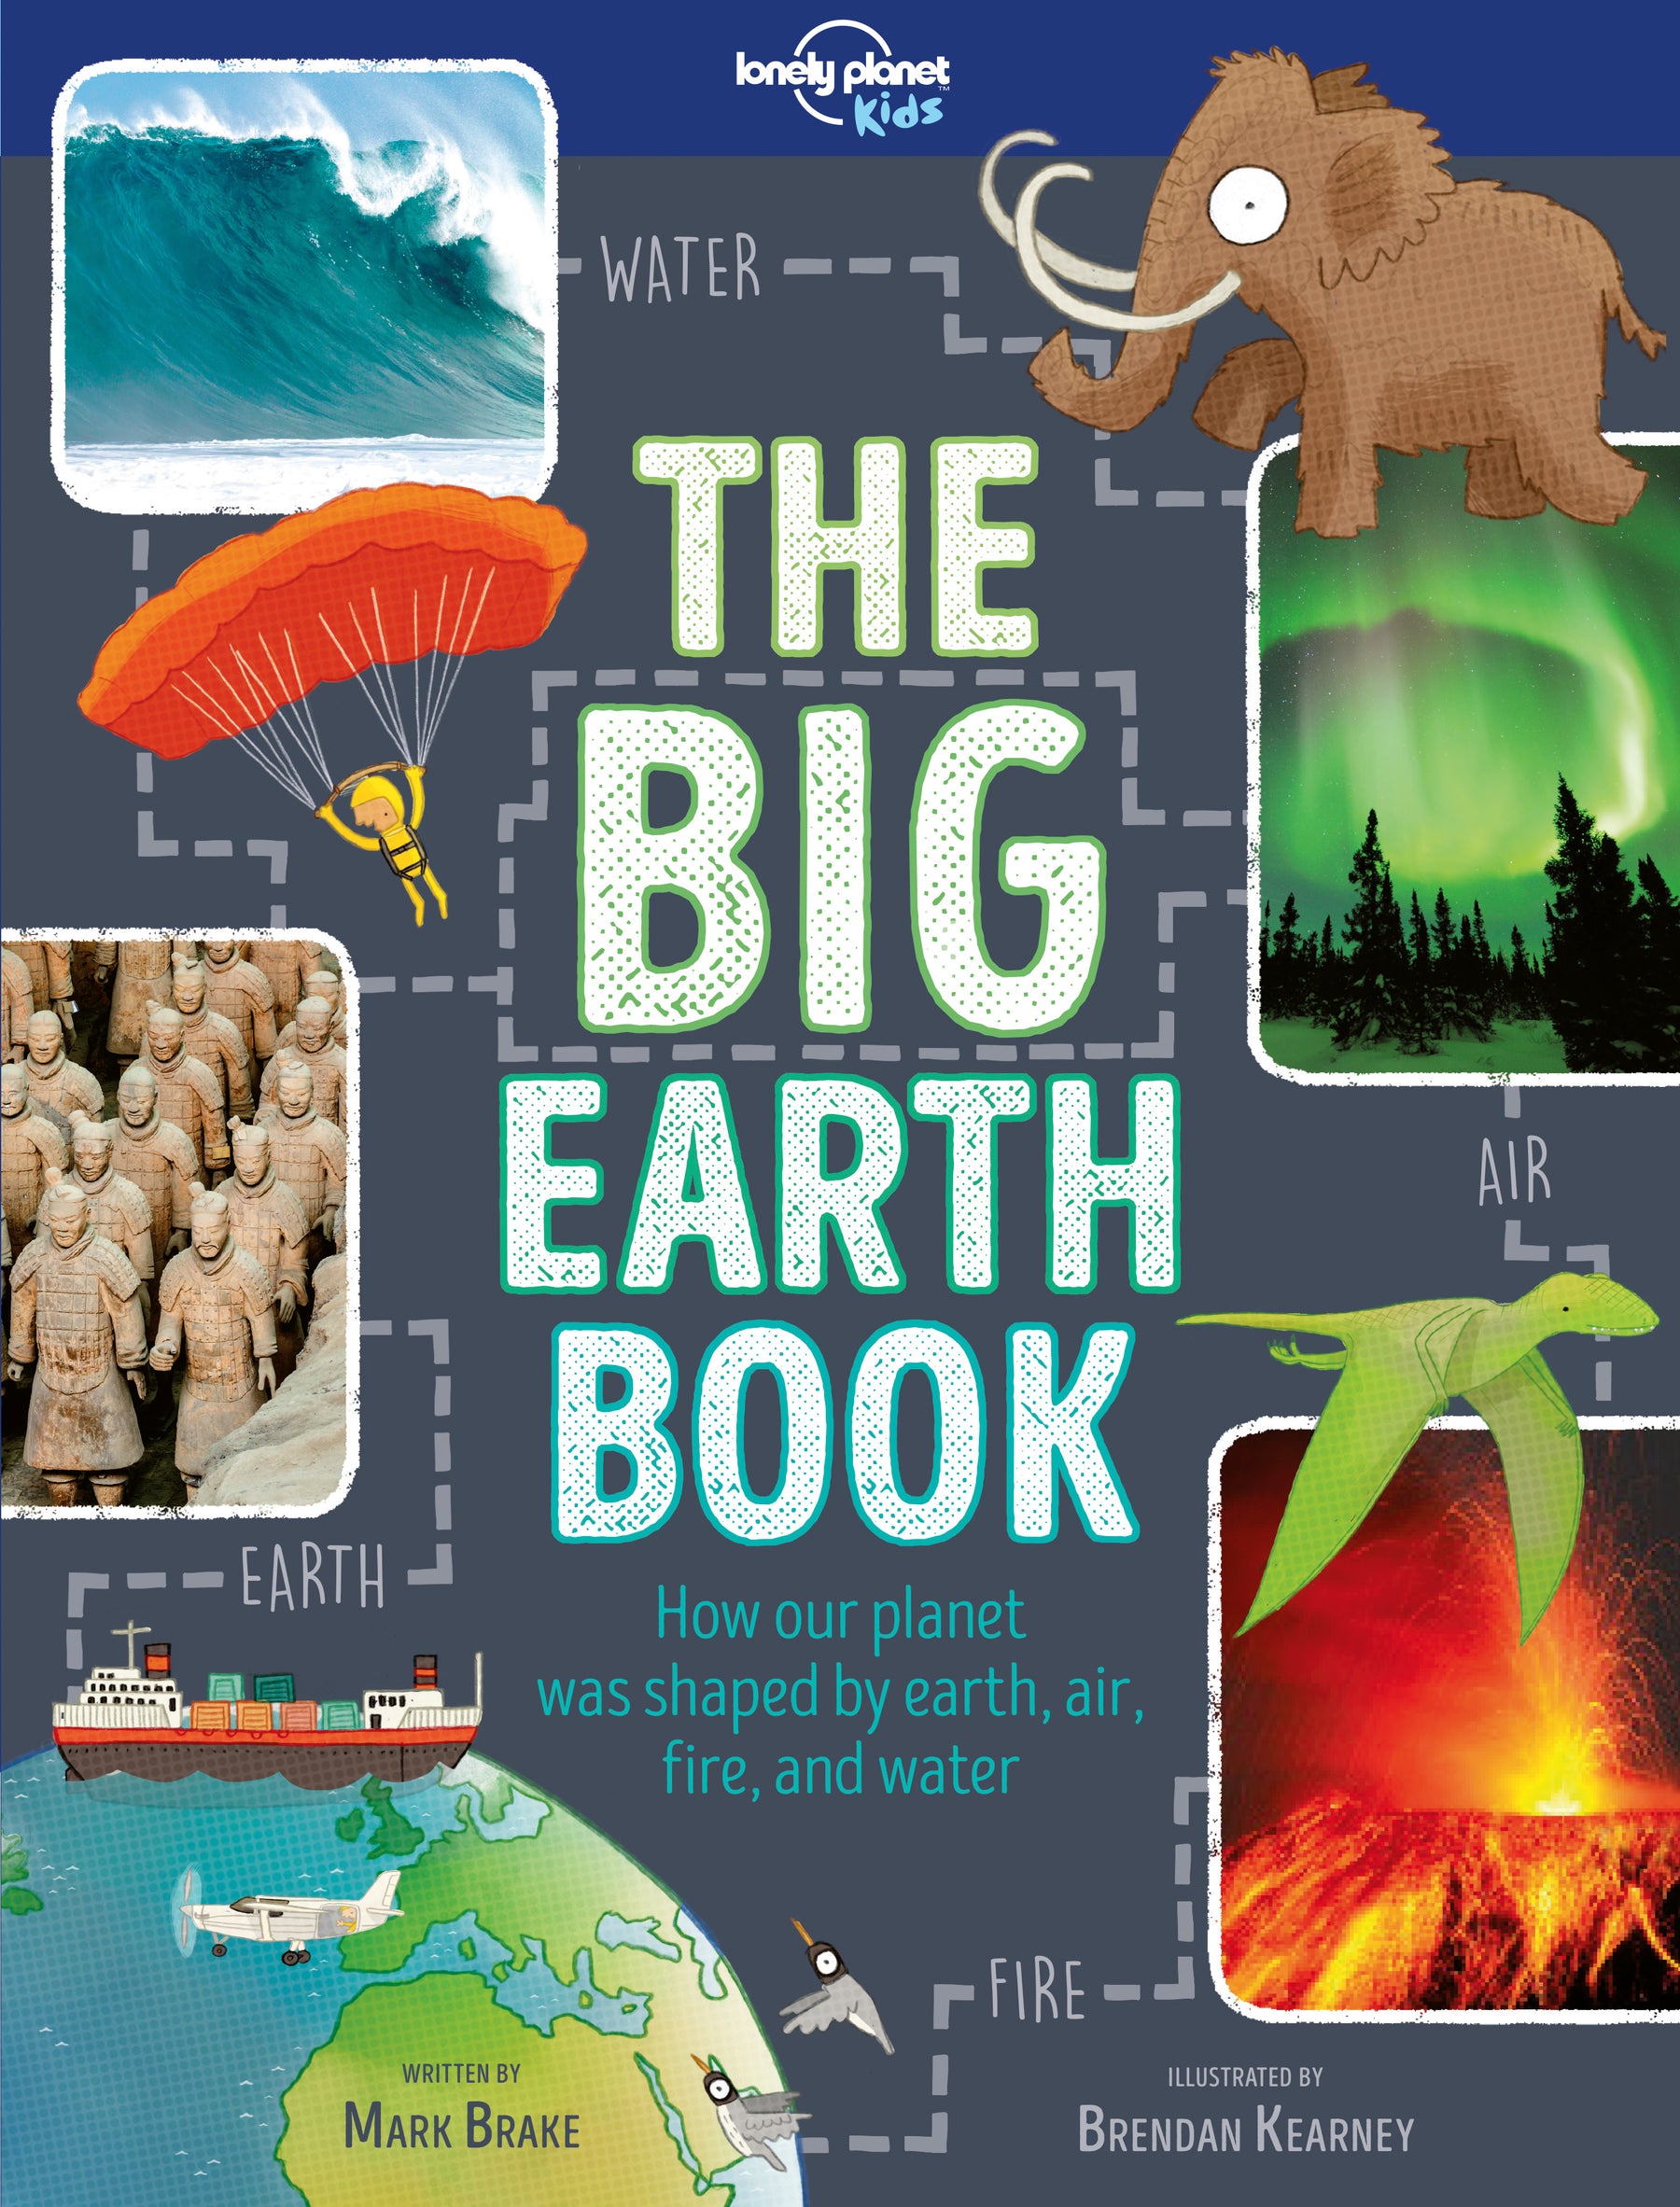 The Big Earth Book (North and South America edition)